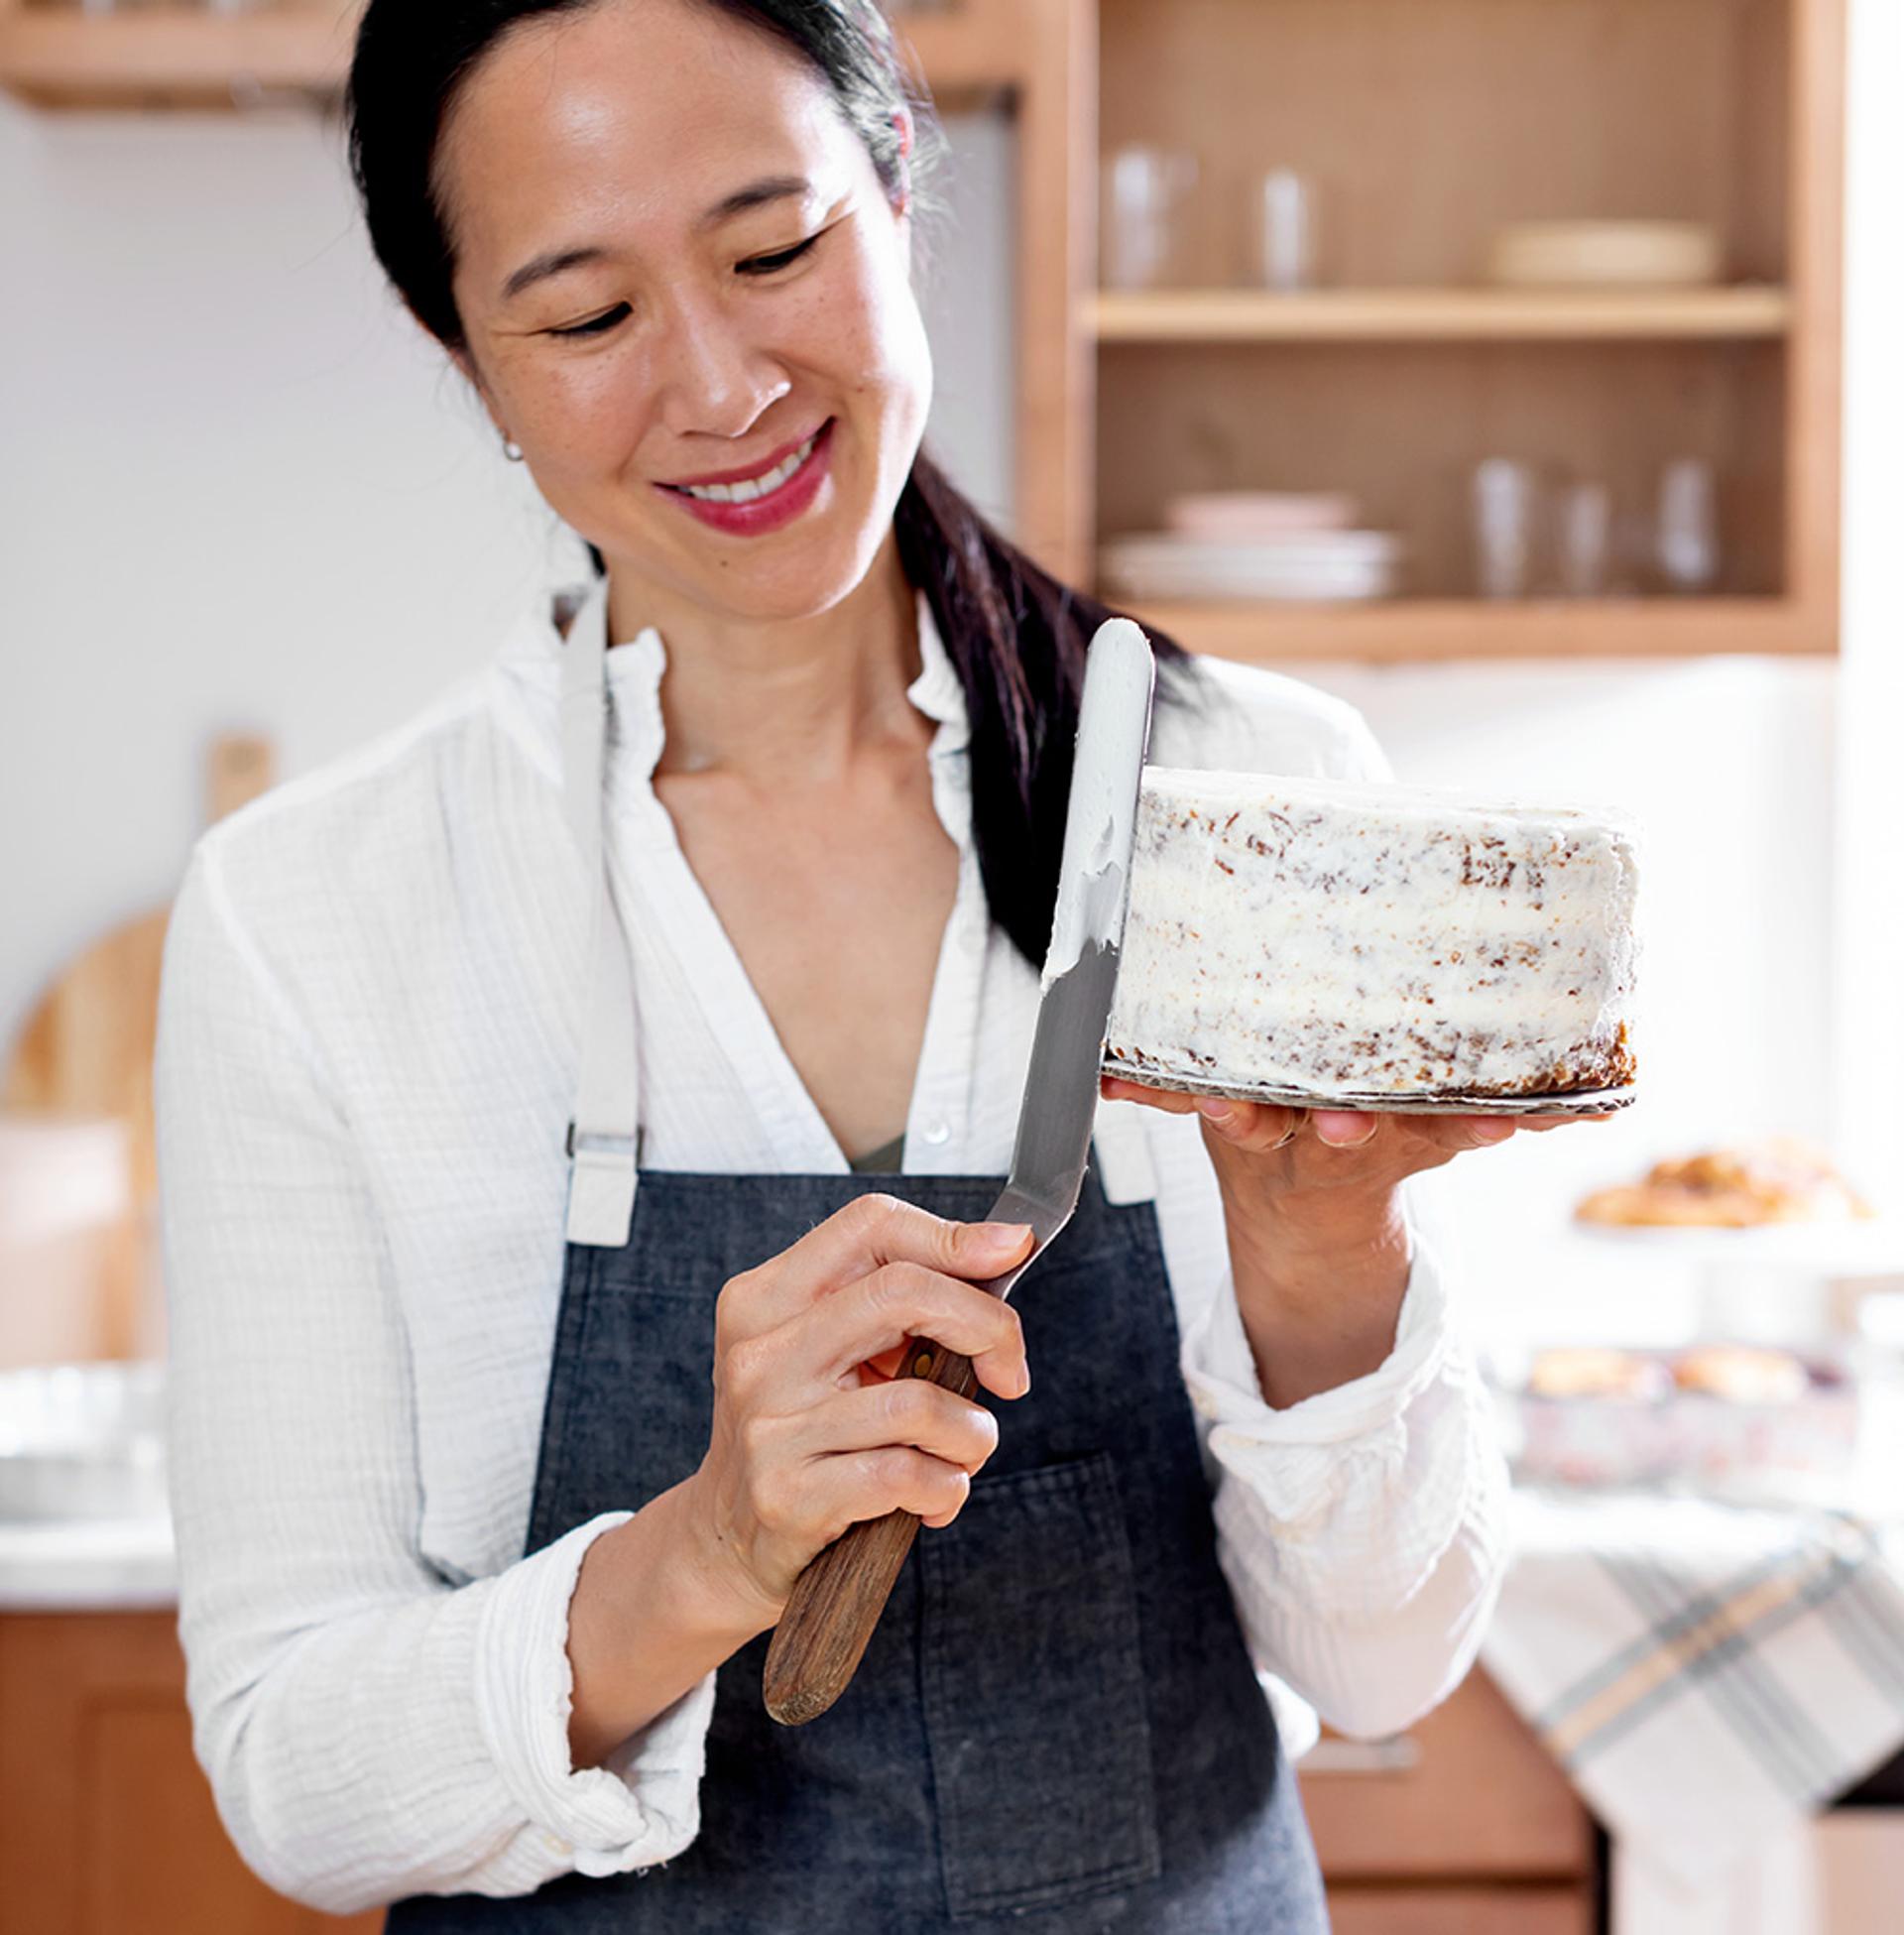 Joanne Chang with a carrot cake